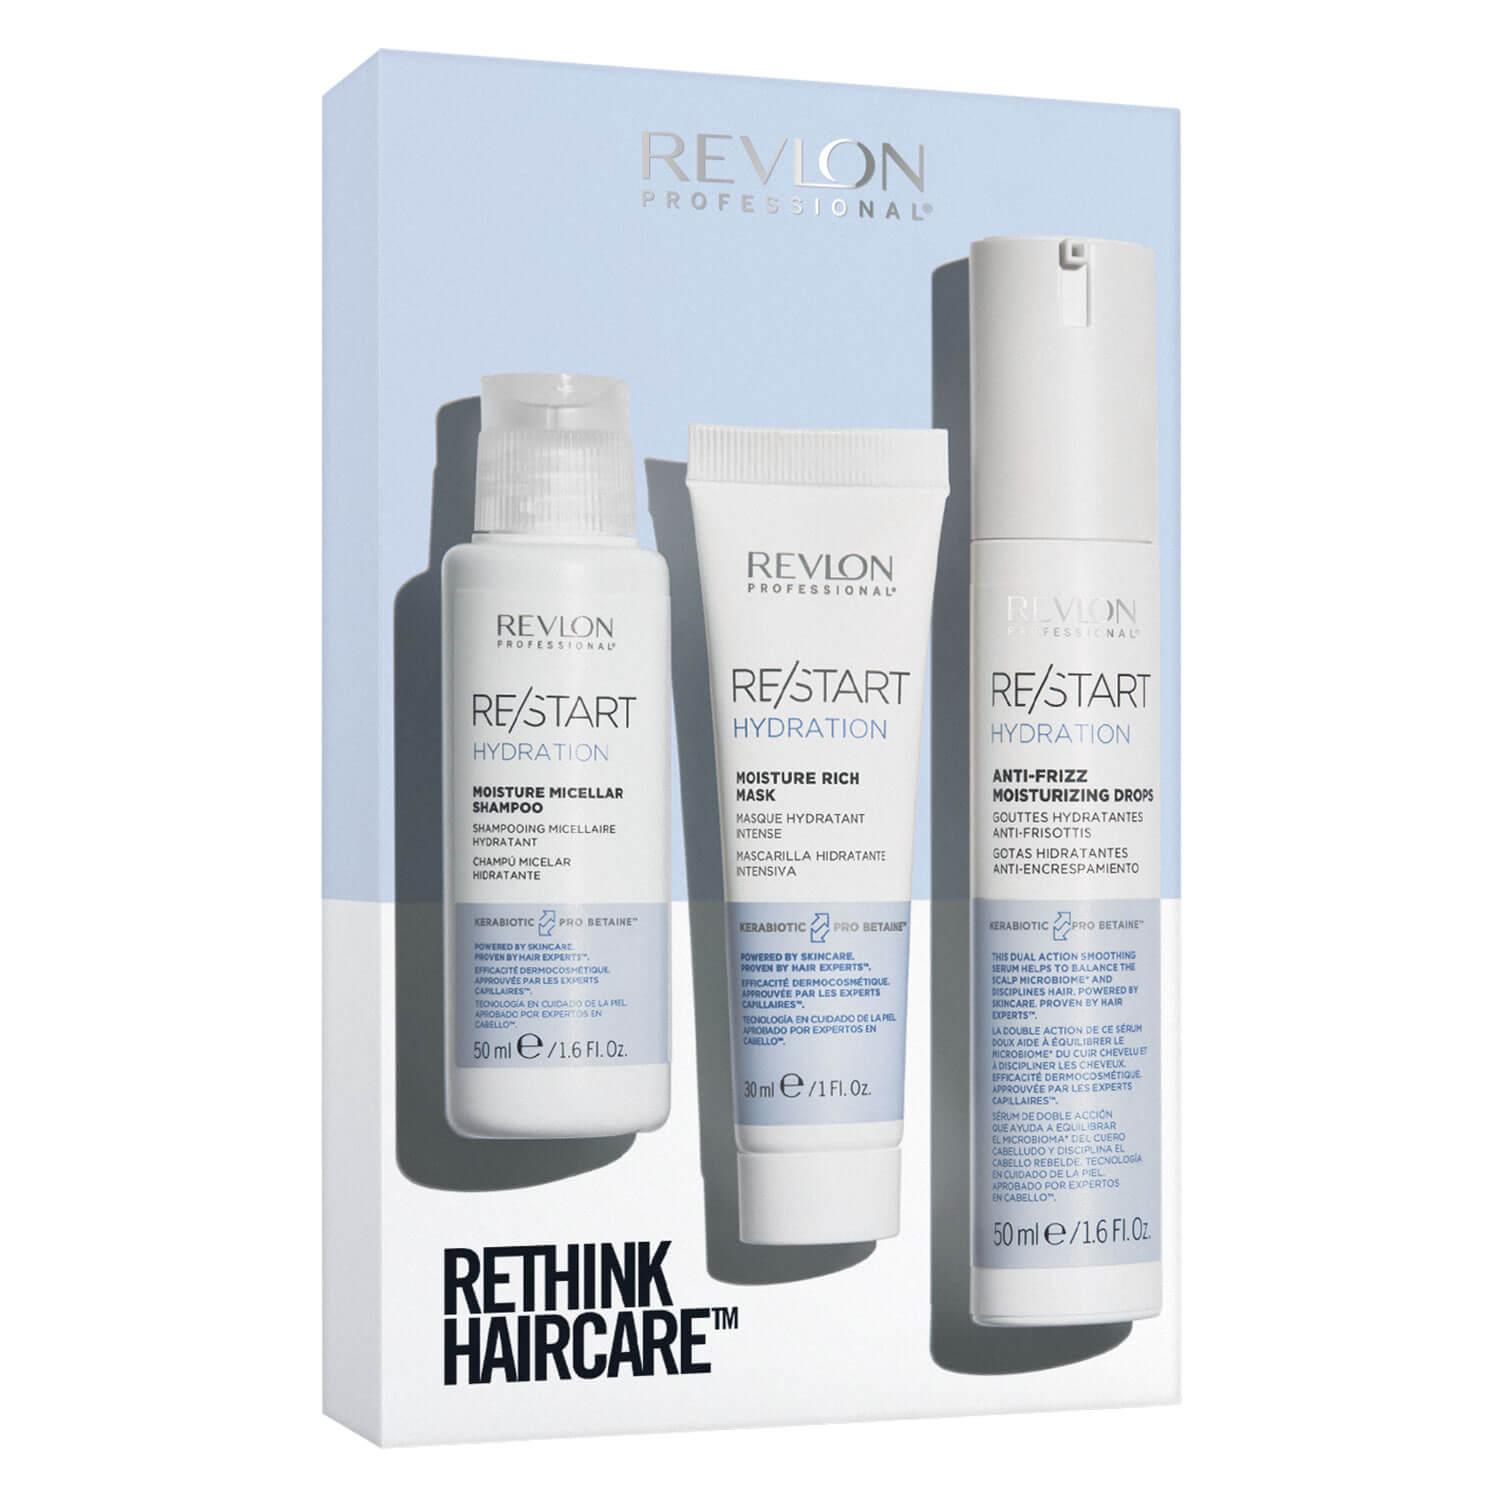 RE/START HYDRATION - Rethink Haircare Kit